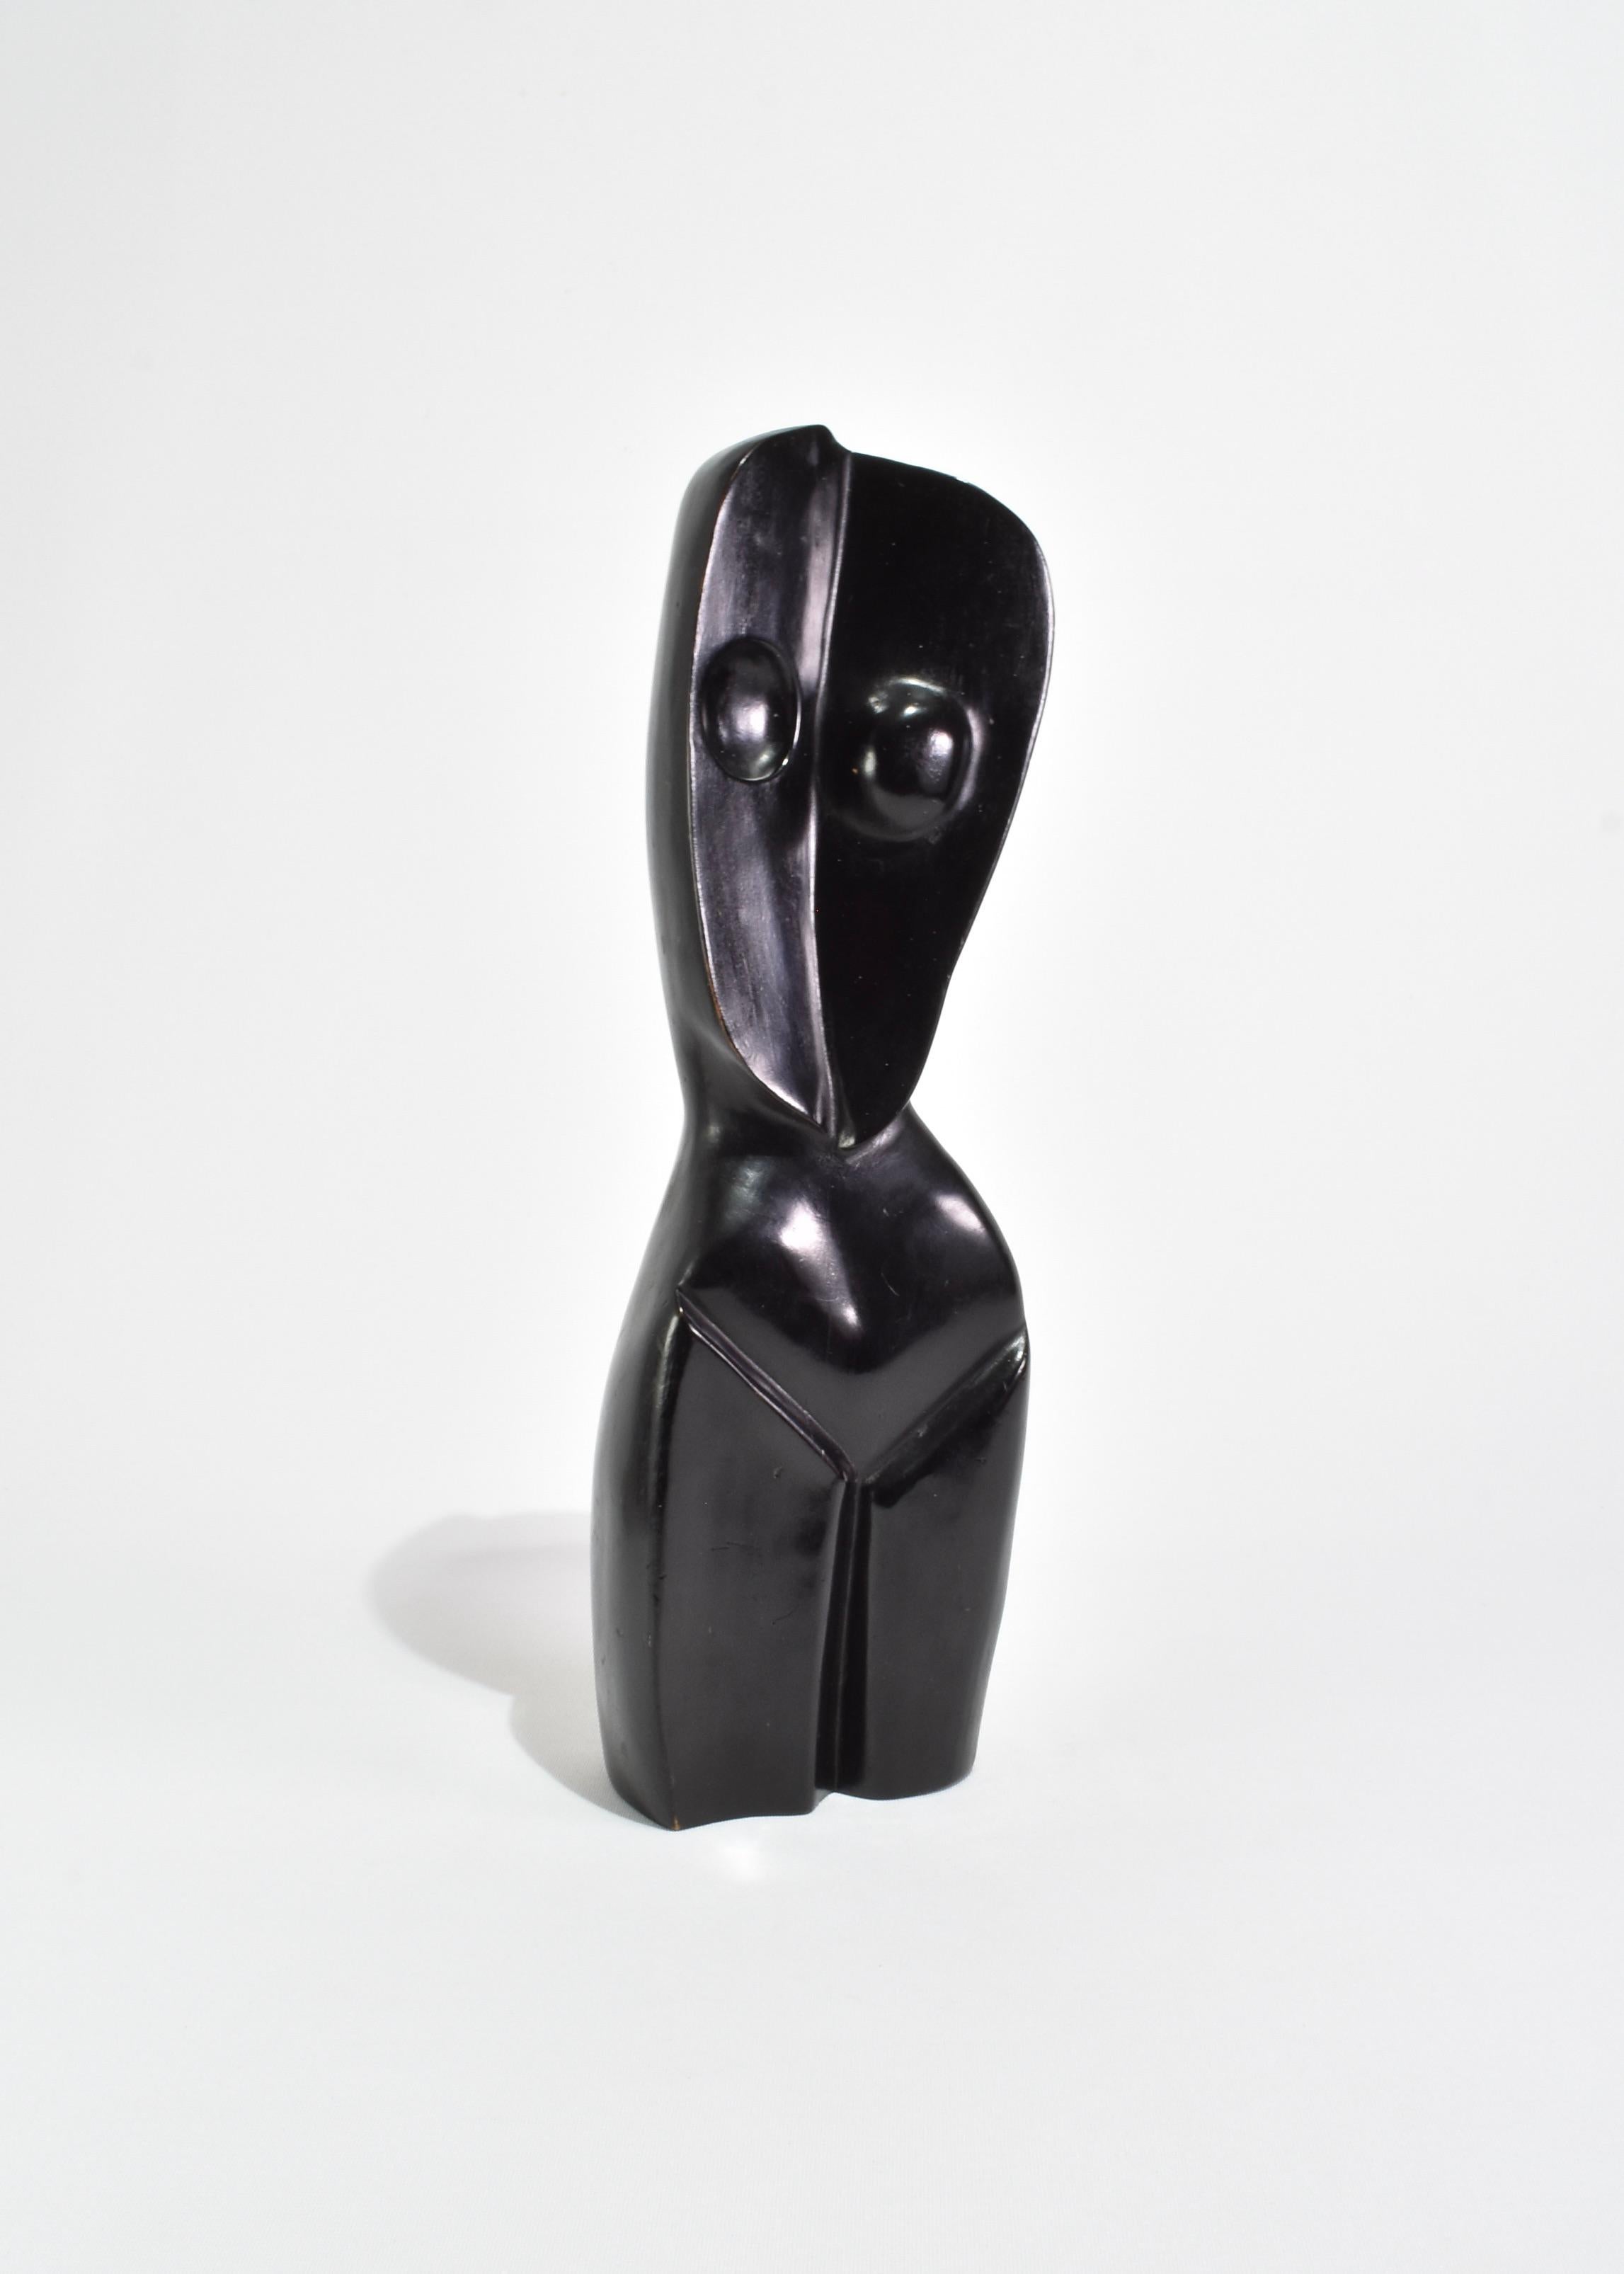 Cubist style carved torso sculpture in ebonized wood. Ca. 1960s.